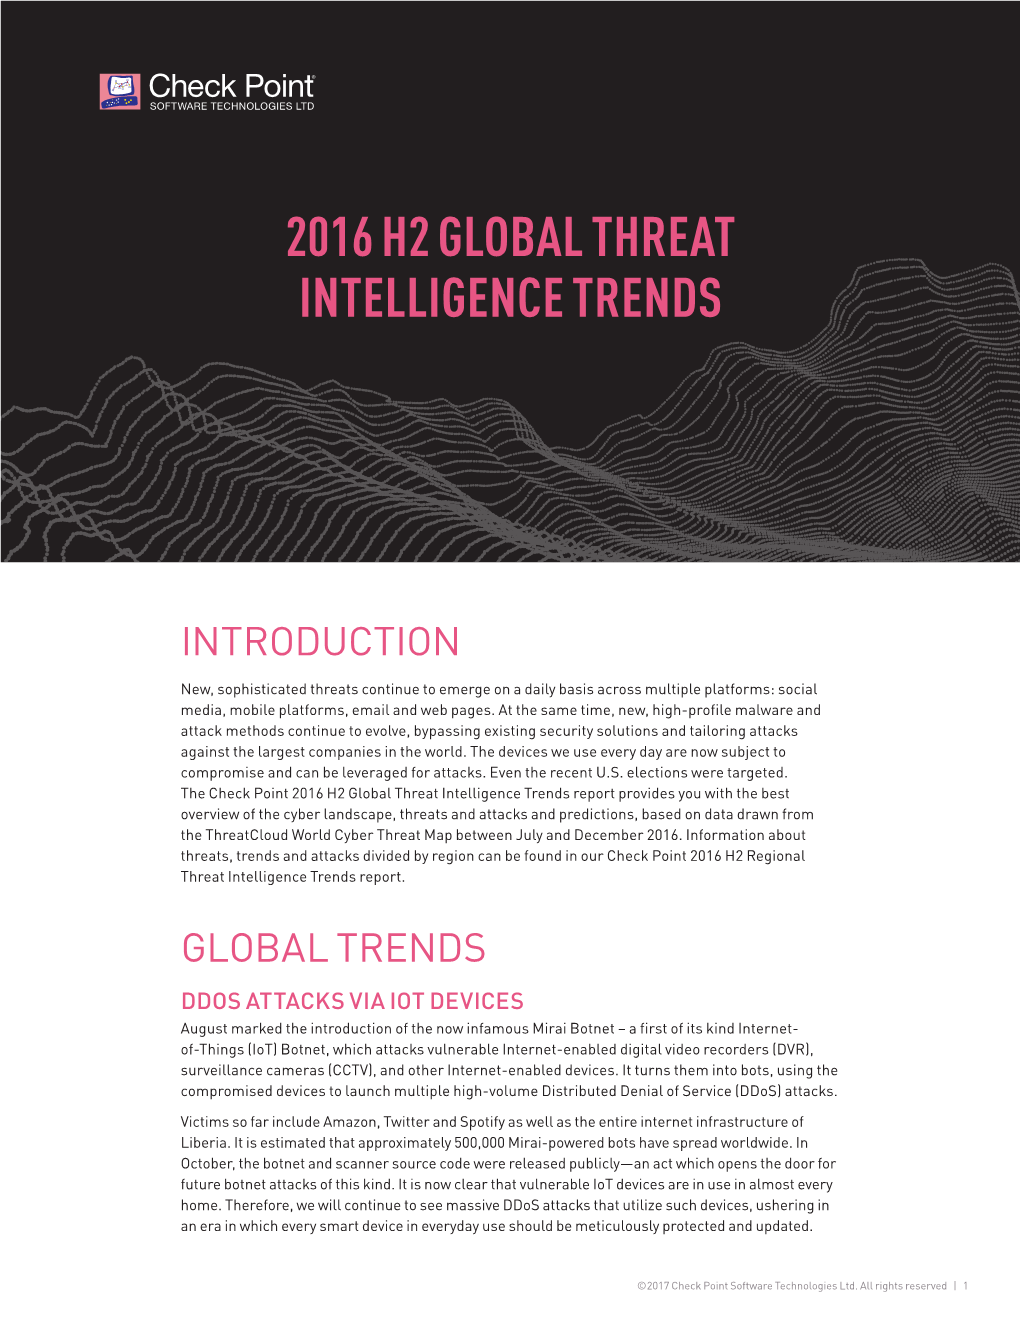 Check Point 2016 H2 Global Threat Intelligence Trends Report